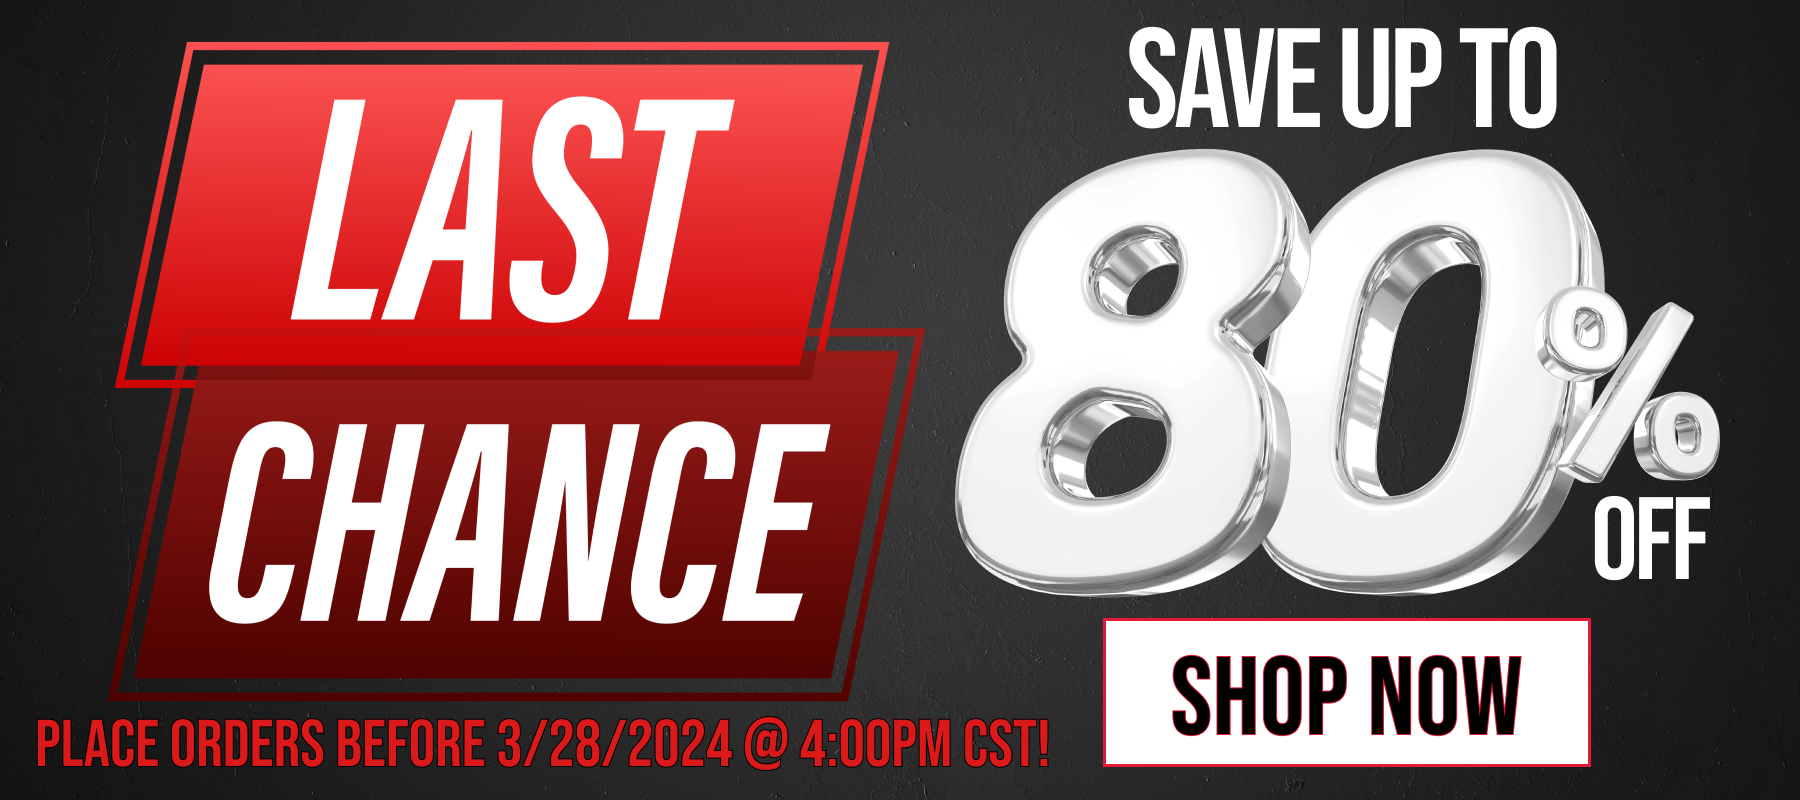 LAST CHANCE//SAVE UP TO 80% OFF//PLACE ORDERS BEFORE 3/28/2024 @ 4:00PM CST!//SHOP NOW